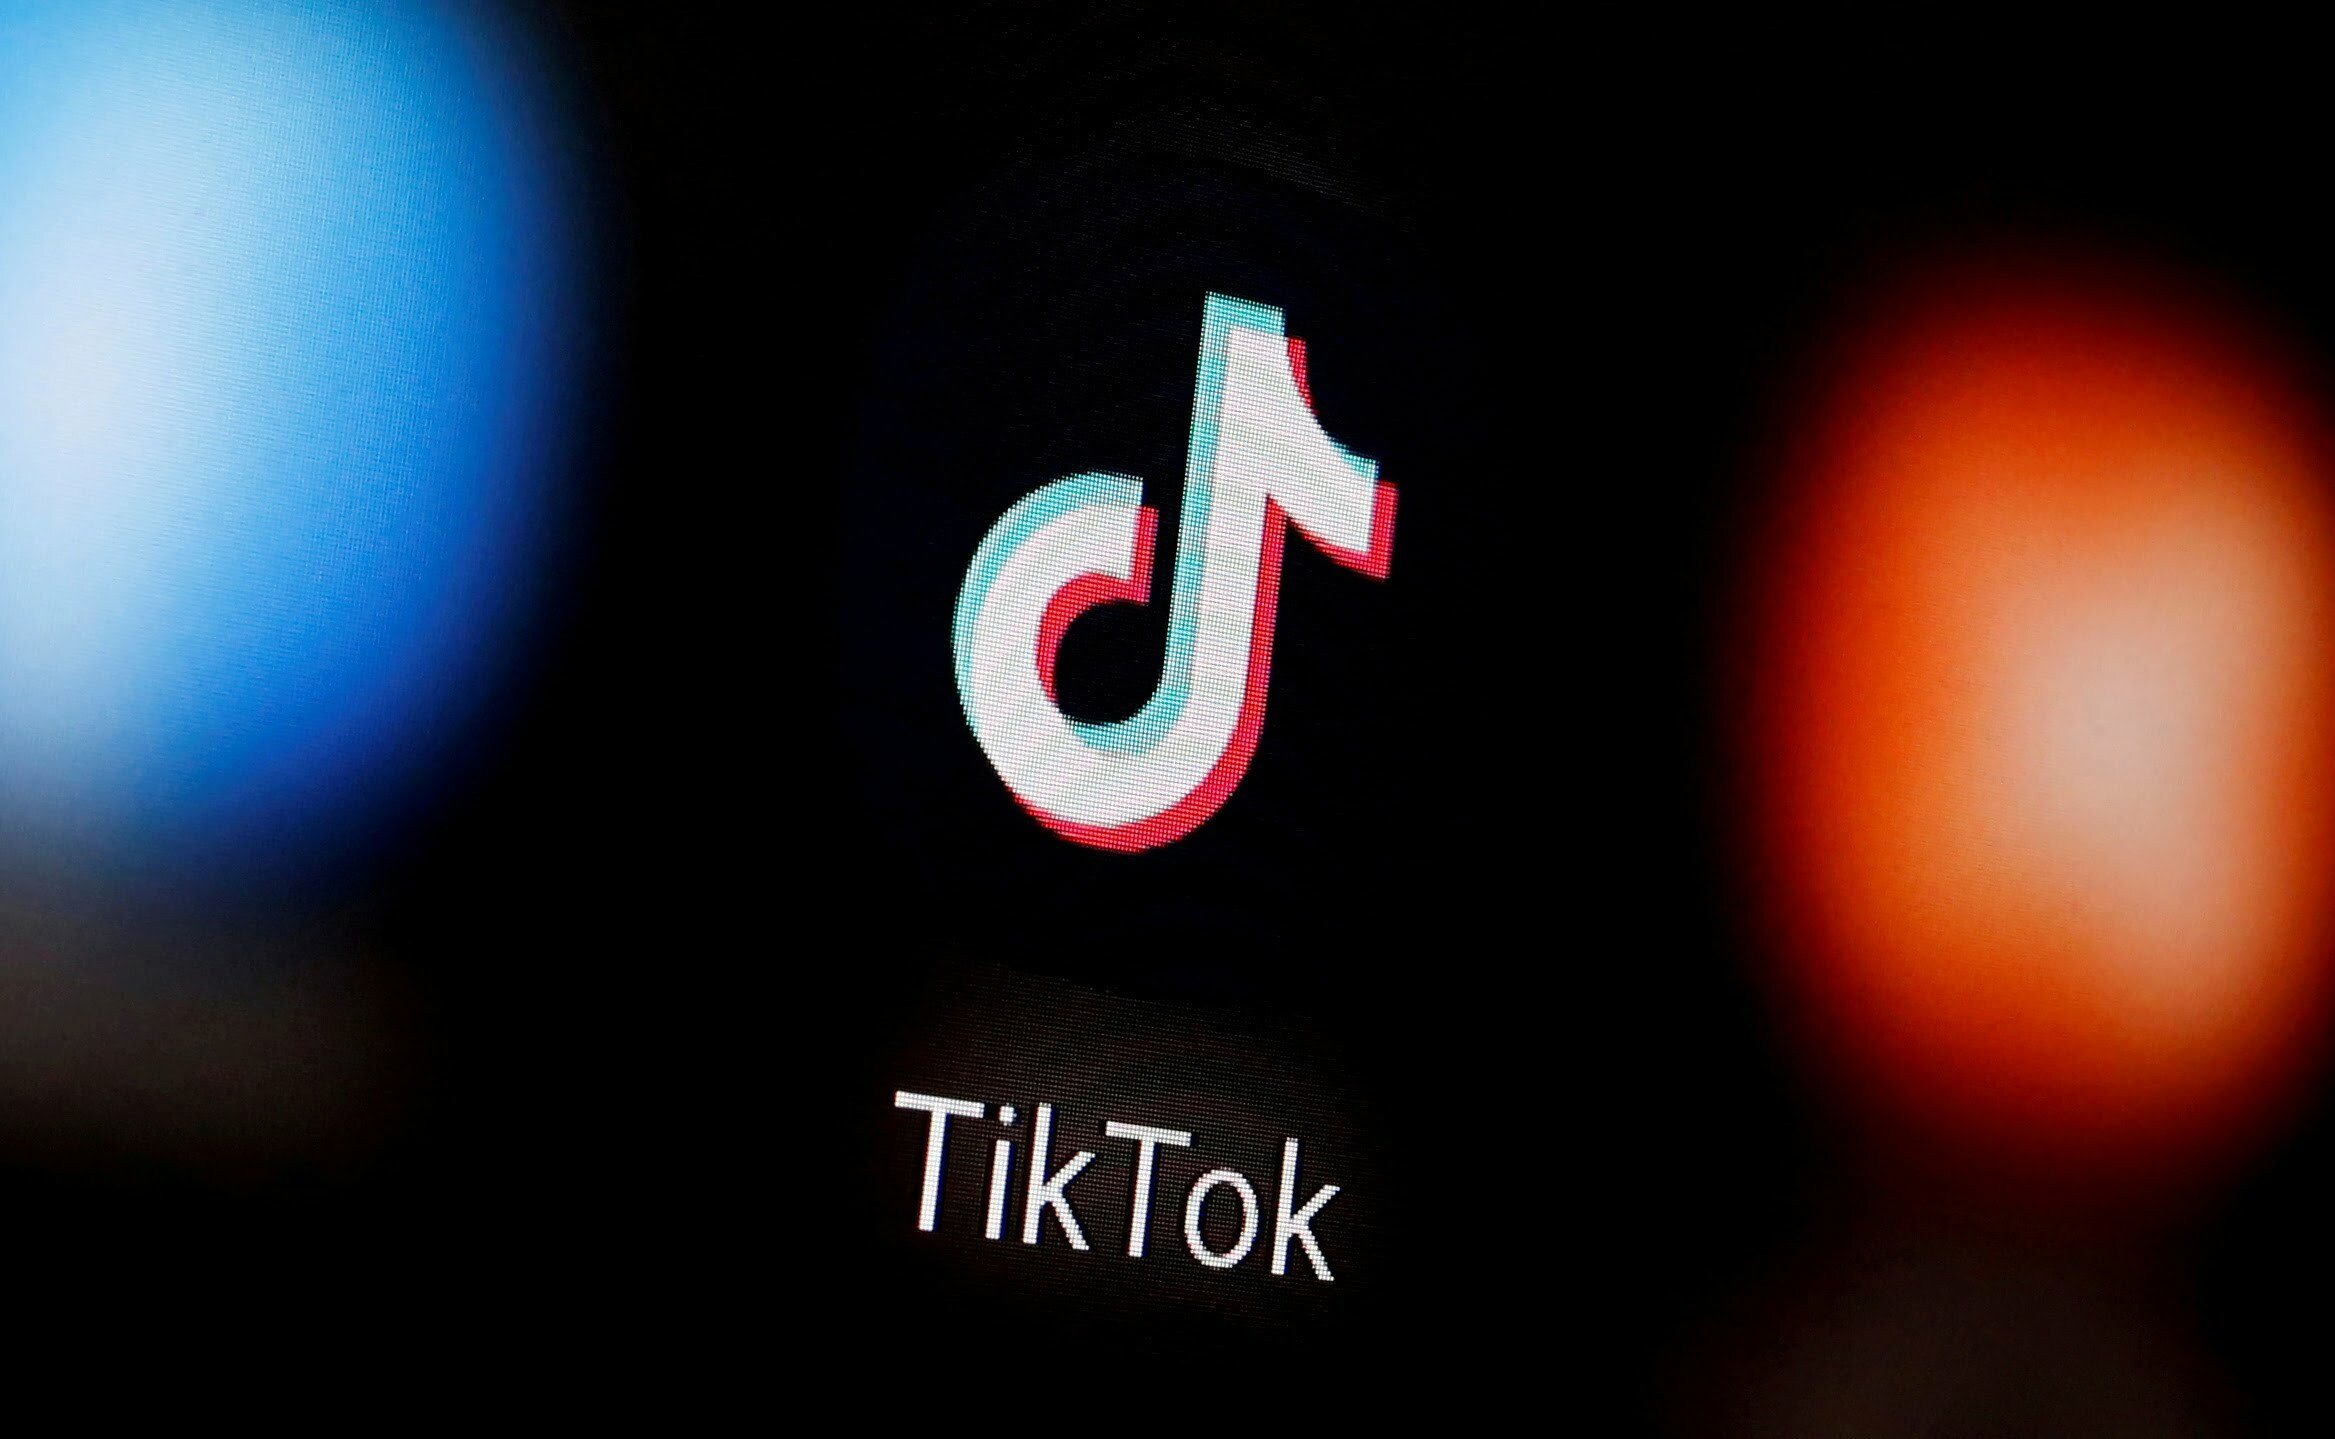 Is TikTok still owned by China?